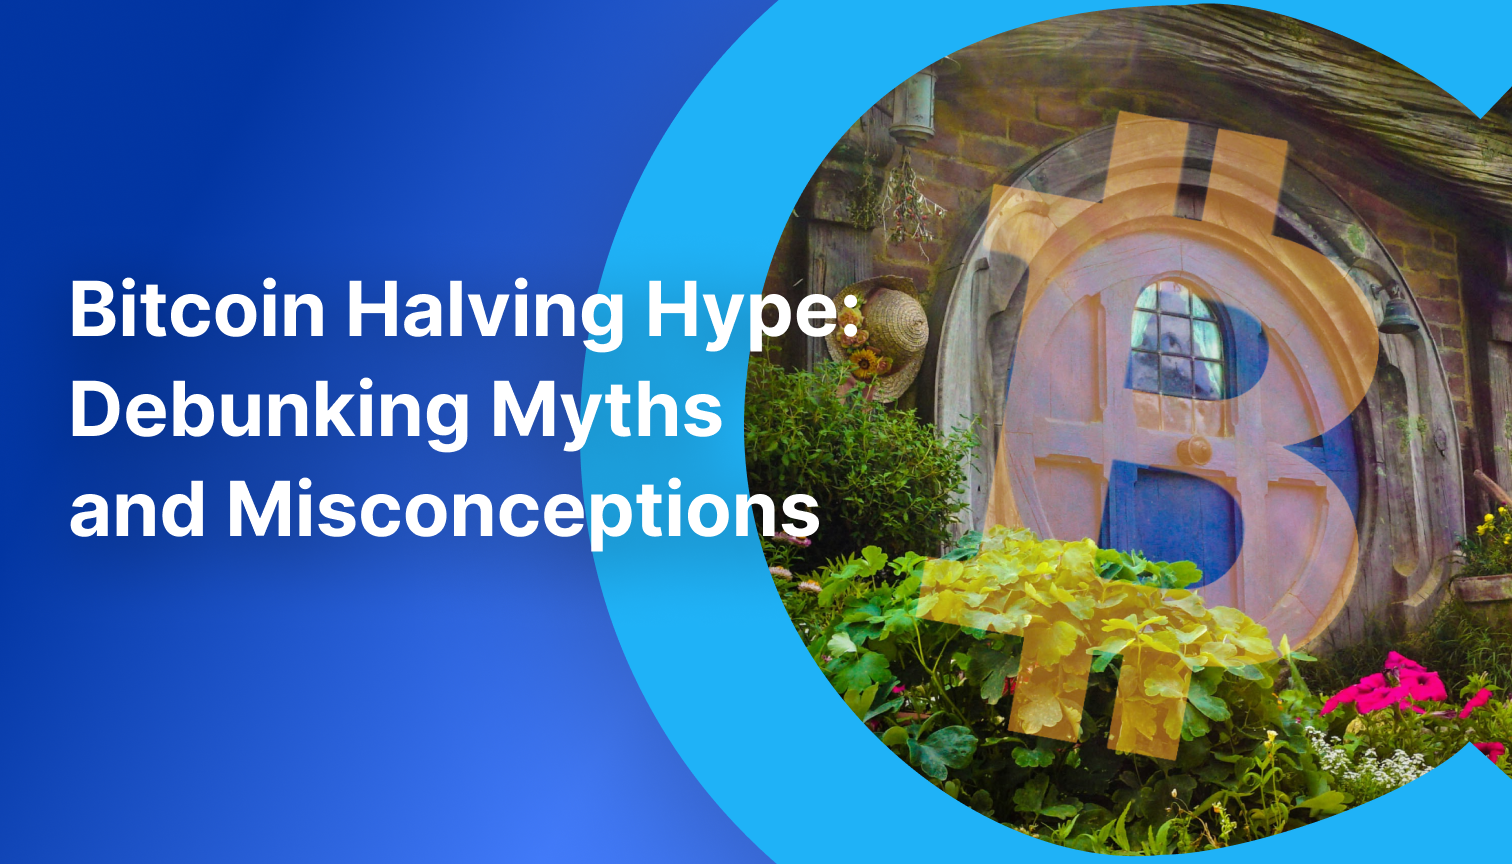 Bitcoin Halving Hype: Debunking Myths and Misconceptions